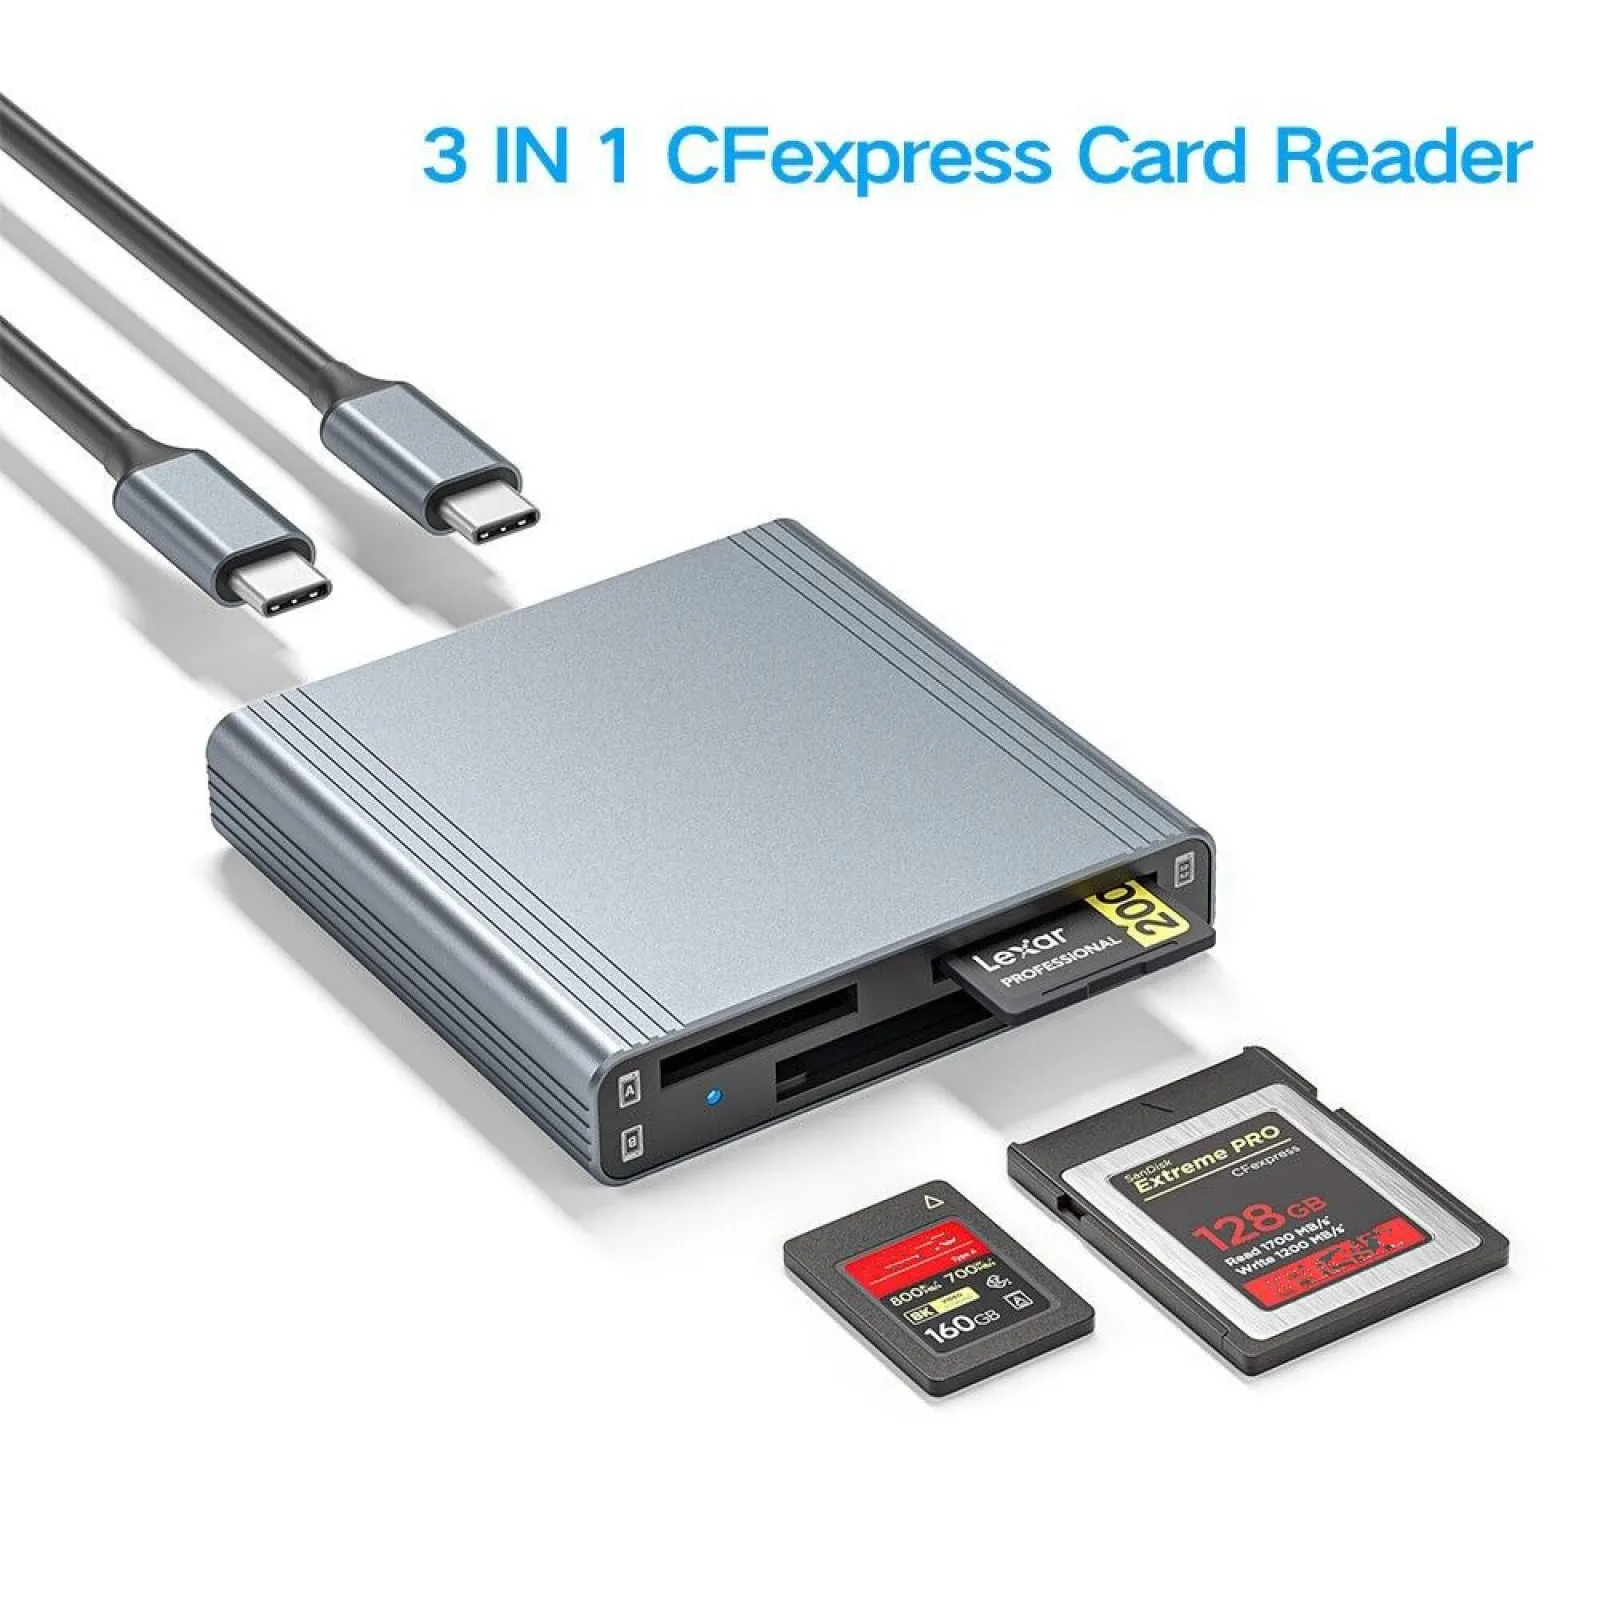 

3 in 1 Card Reader USB 3.1 Gen2 10Gbps For CFexpress Type A / Type B / SD Memory Card Data Transfer Aluminum Alloy Card Reader